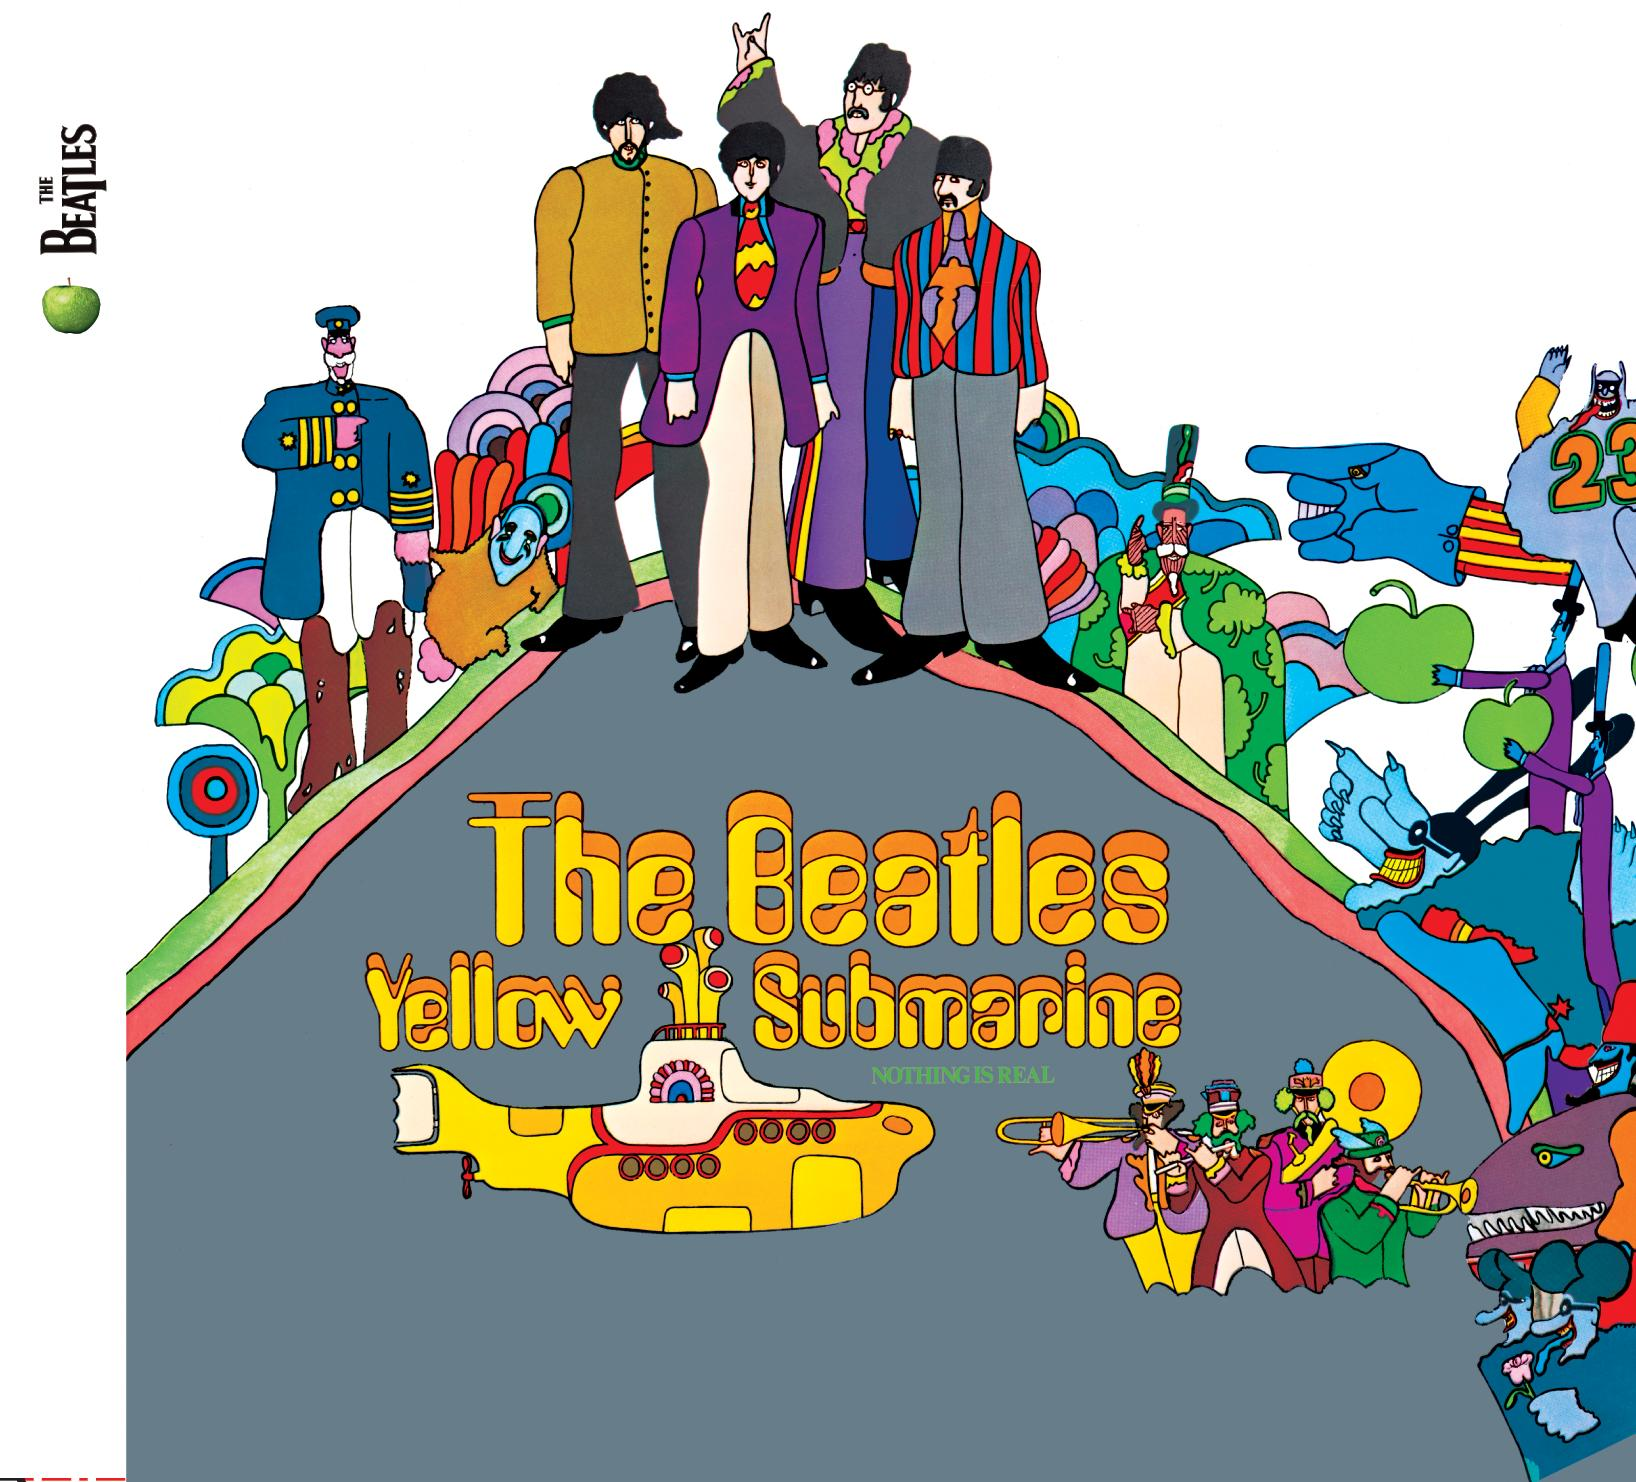 Art for Hey Bulldog by The Beatles